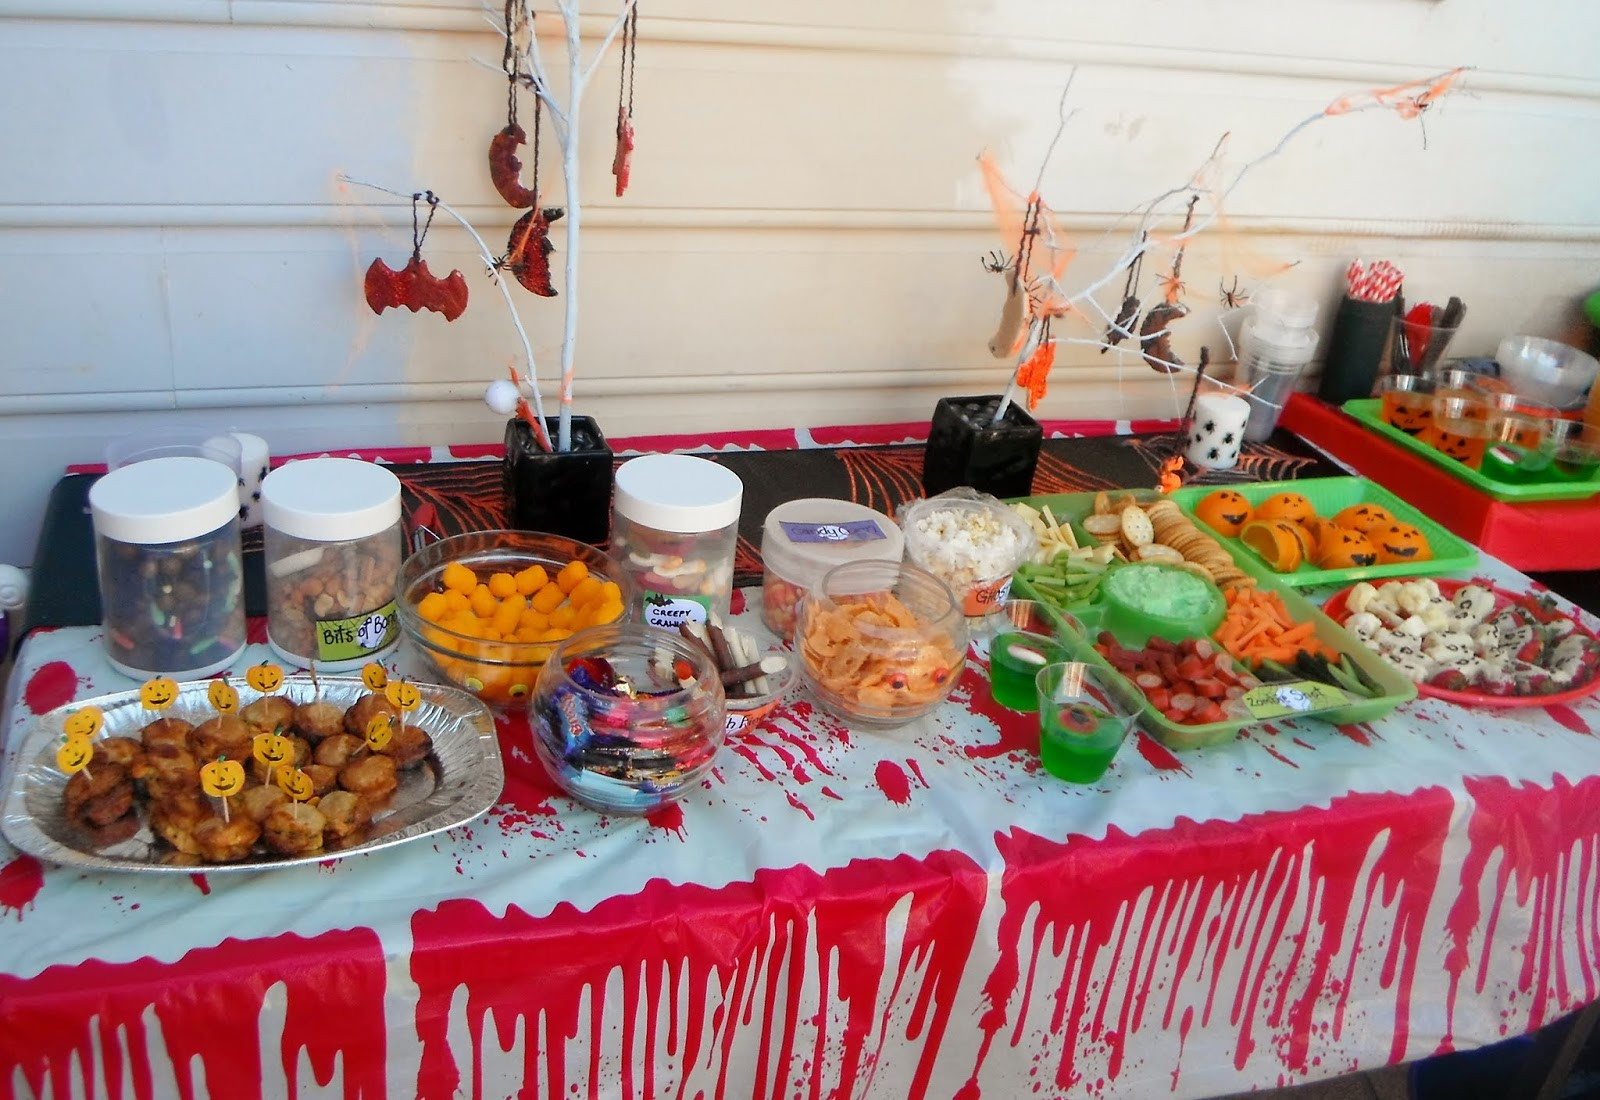 Toddler Halloween Birthday Party Ideas
 Adventures at home with Mum Halloween Party Food